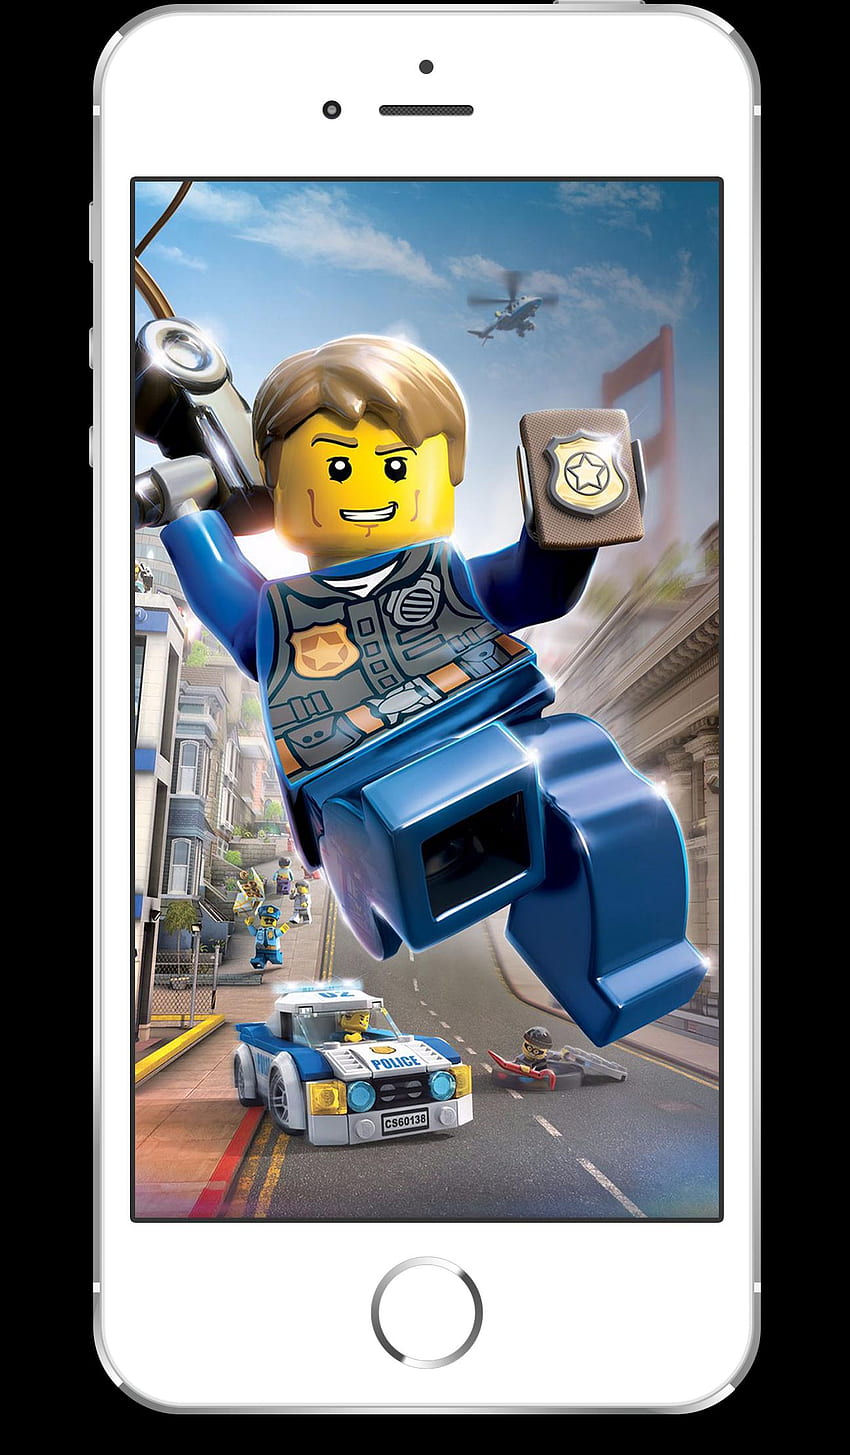 U LEGO City Police Ultra Quality for Android - APK, LEGO City Undercover HD phone wallpaper